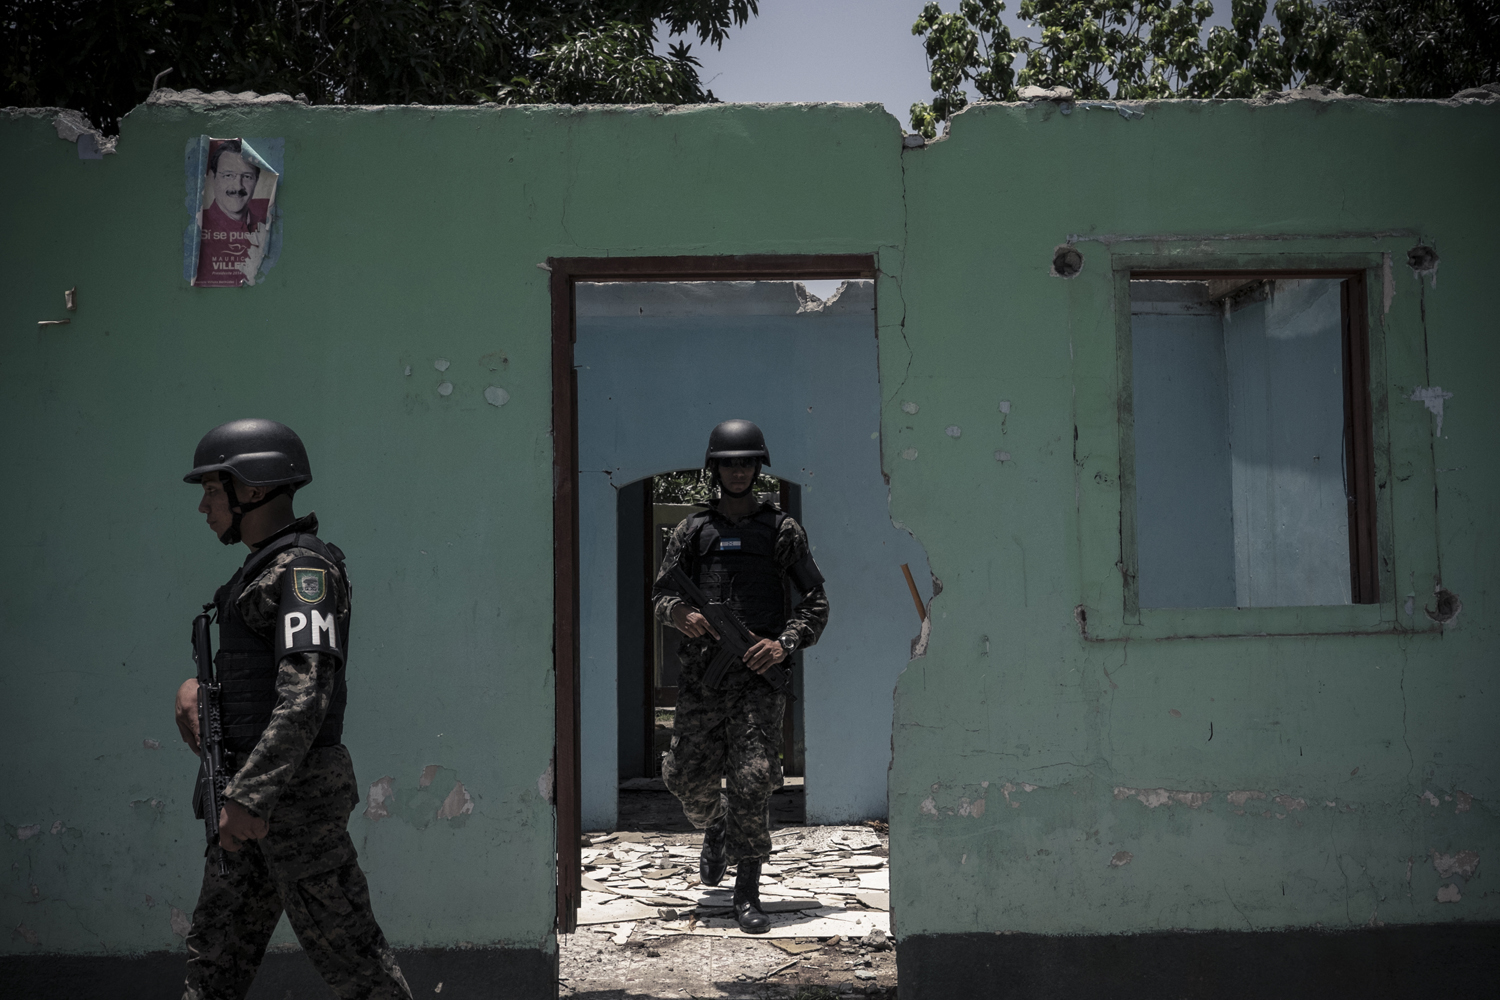 Police who are supported by the Army patrol the Chamelecón area of San Pedro Sula. The area is a ghost town, as almost all residents left due to violence, extortion and murder. Honduras. July 15, 2014.